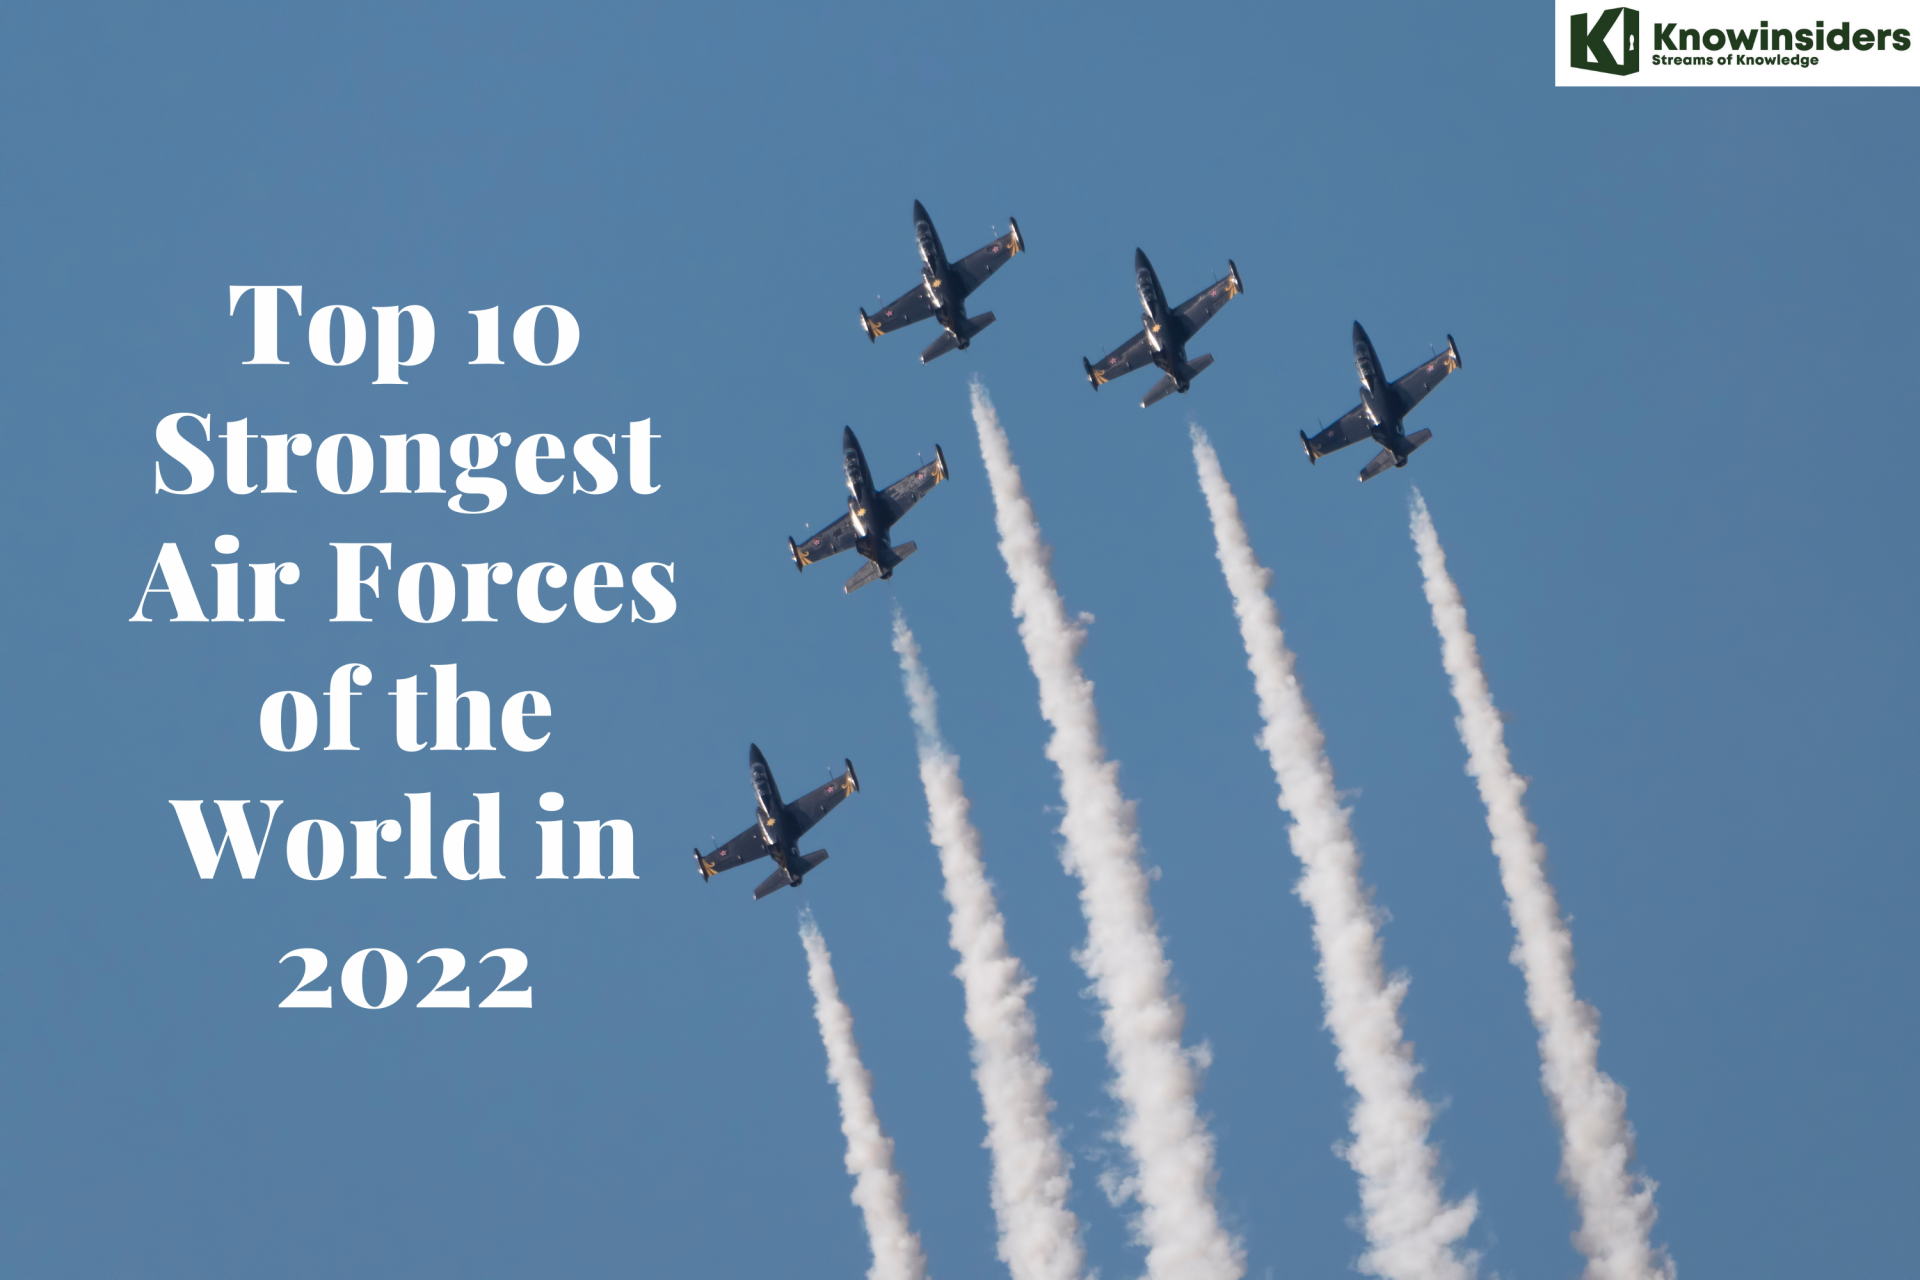 Top 10 Strongest Air Forces of the World in 2022